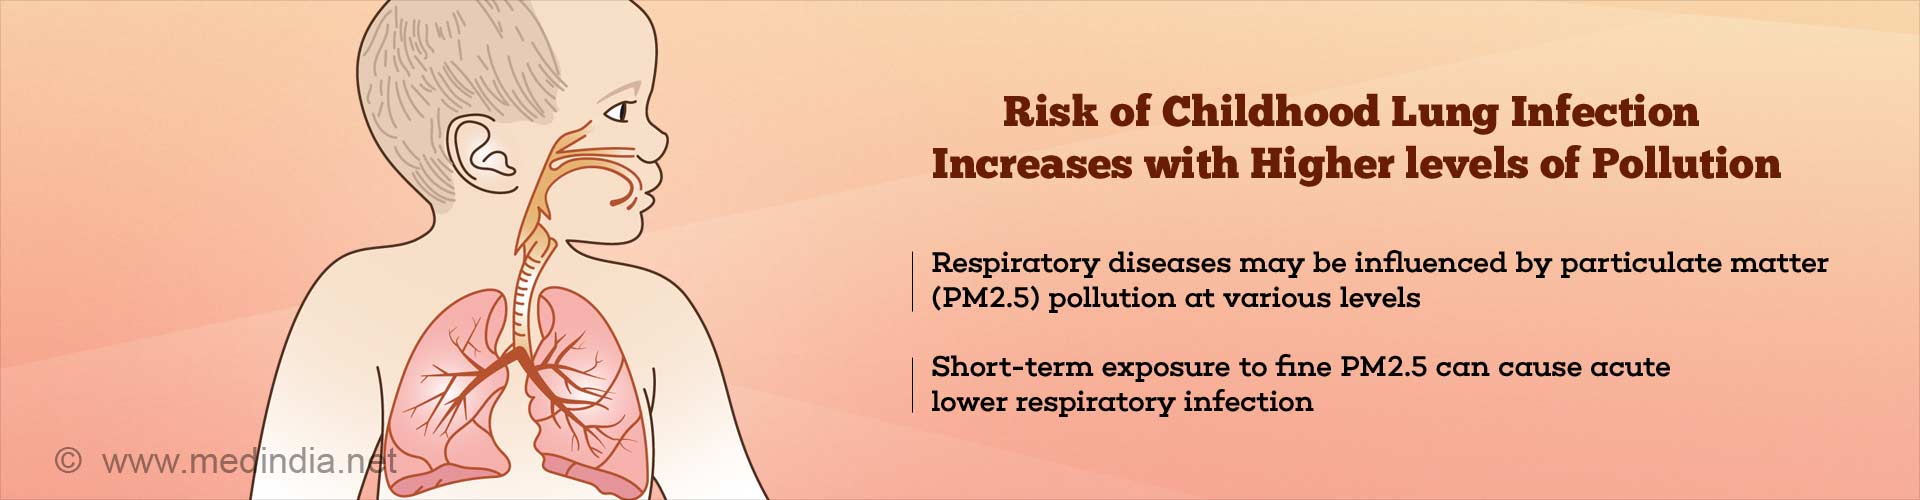 Risk of childhood lung infection increases with higher levels of pollution
- Respiratory disease may be influenced by particulate matter (PM2.5) pollution at various levels
- short-term exposure to fine PM2.5 can cause acute lower respiratory infection